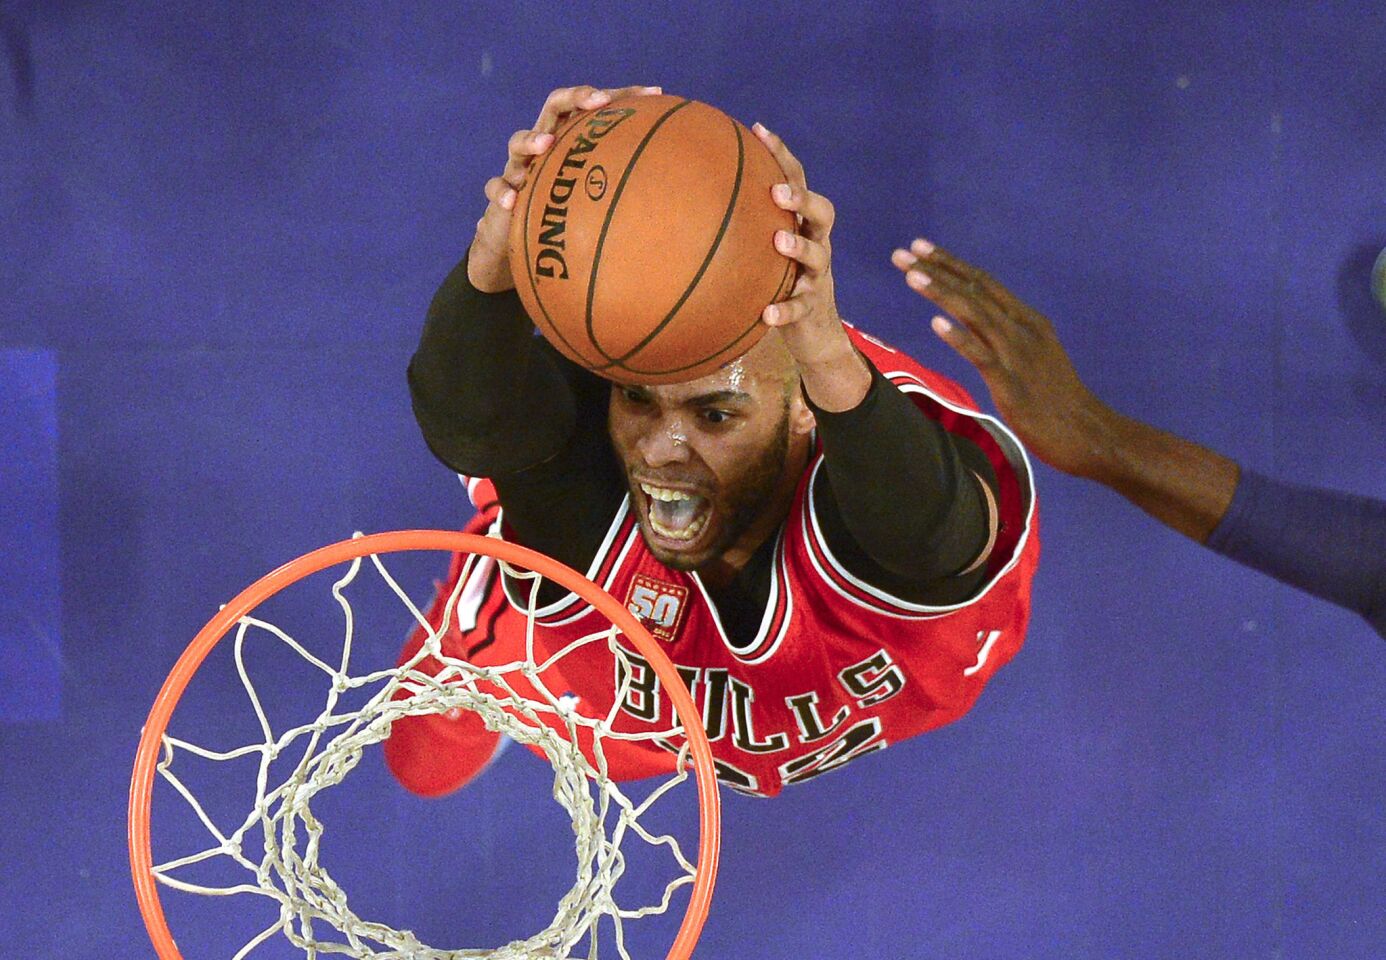 Bulls forward Taj Gibson dunks during the first half against the Lakers.